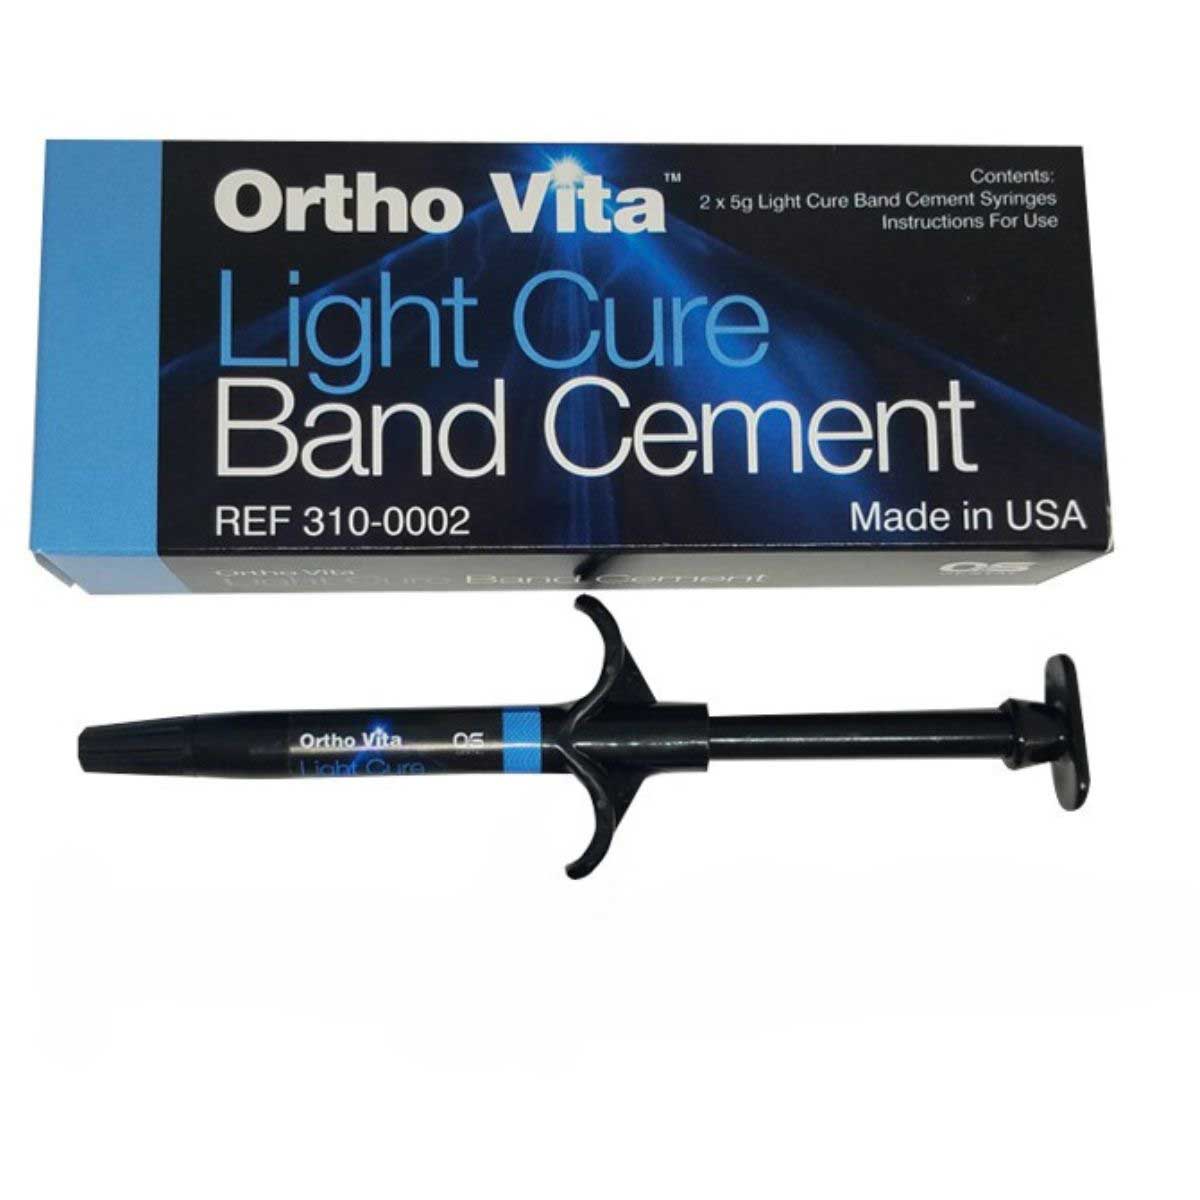 Ortho Vita Blue Band Cement Light Cure In Syringe 5g